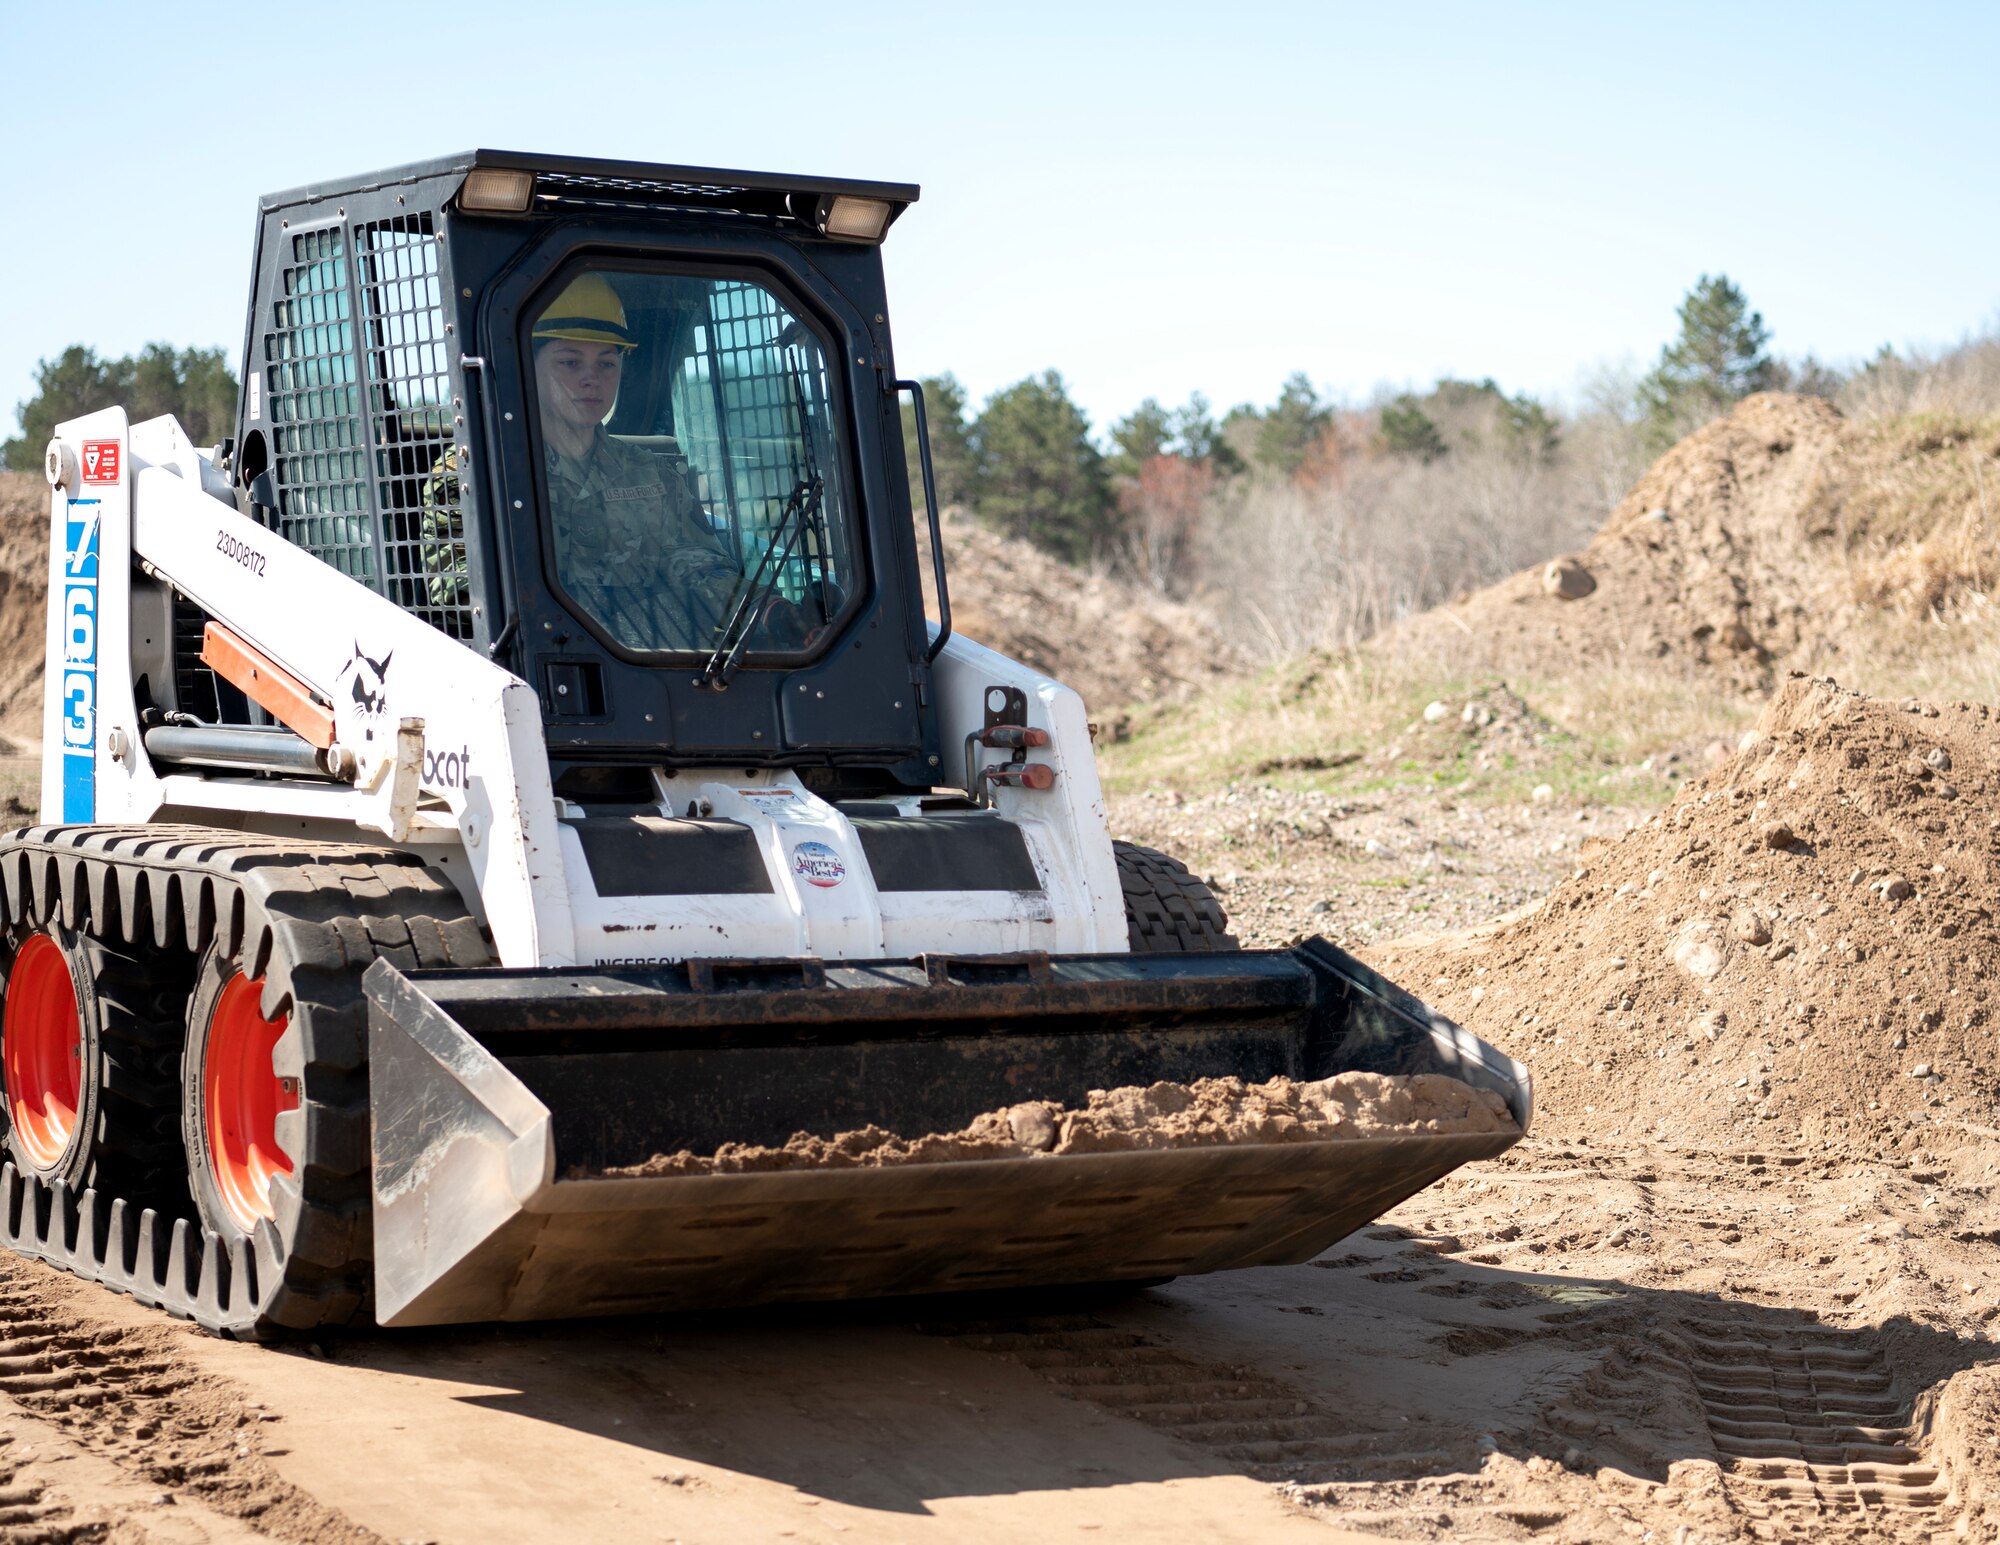 U.S. Air Force Airmen from the 210th Engineering Installation Squadron Squadron trained on Engineering and Installation of heavy equipment, including a cable reel truck, trencher, mid pro, and skid steer at Camp Ripley, Little Falls, Minn., May 5, 2023.